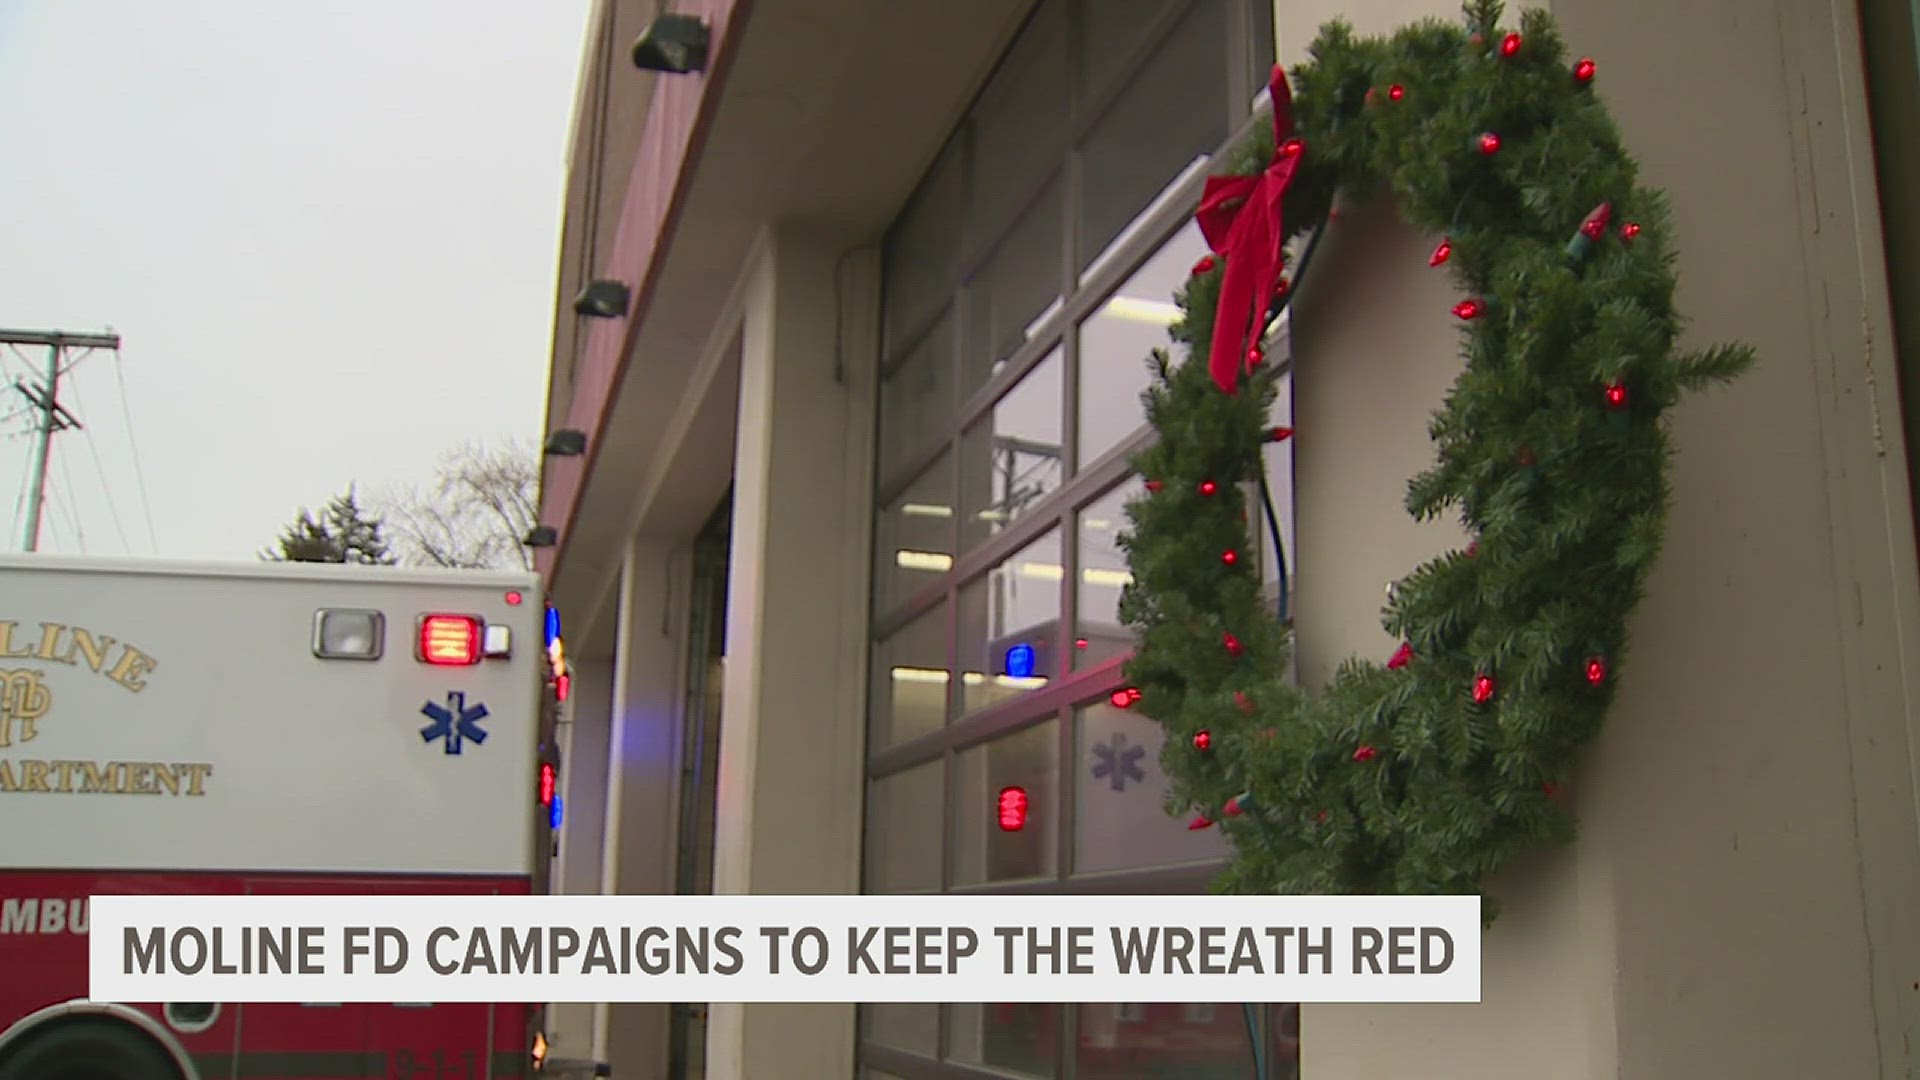 Departments across the country are participating in the "Keep the Wreath Red" campaign. Every time a fire occurs, one of the lights will turn white.